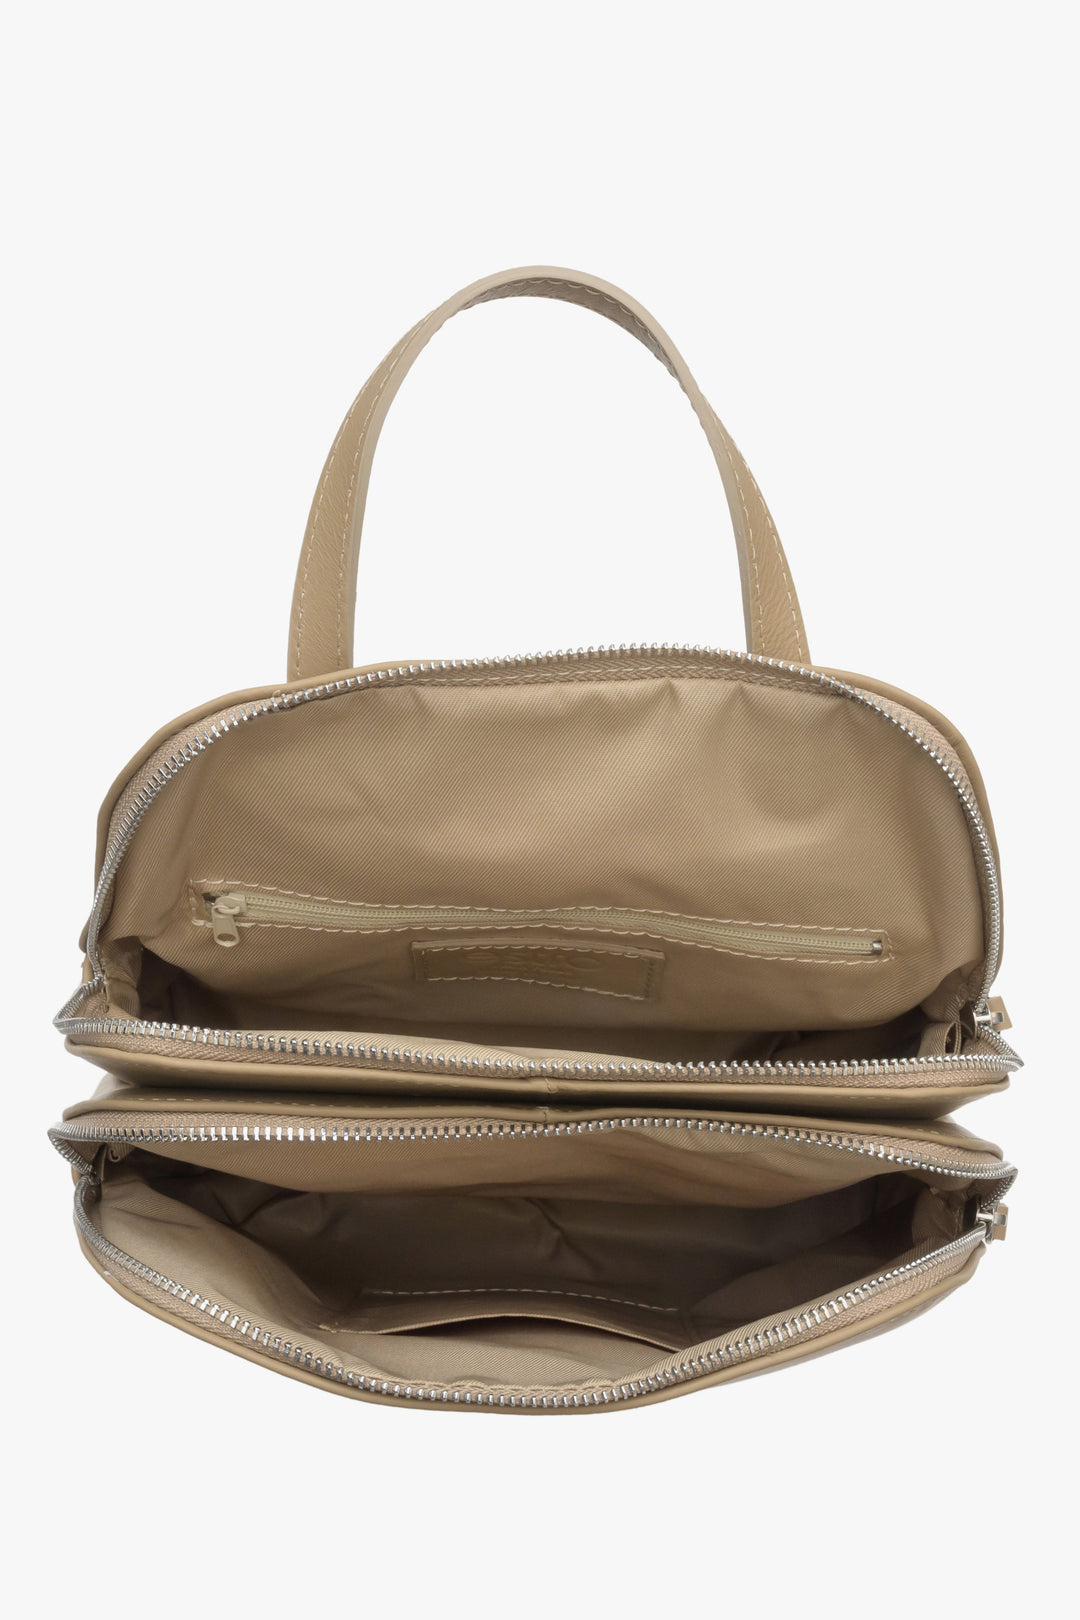 Women's leather beige Estro backpack - close-up on the interior.